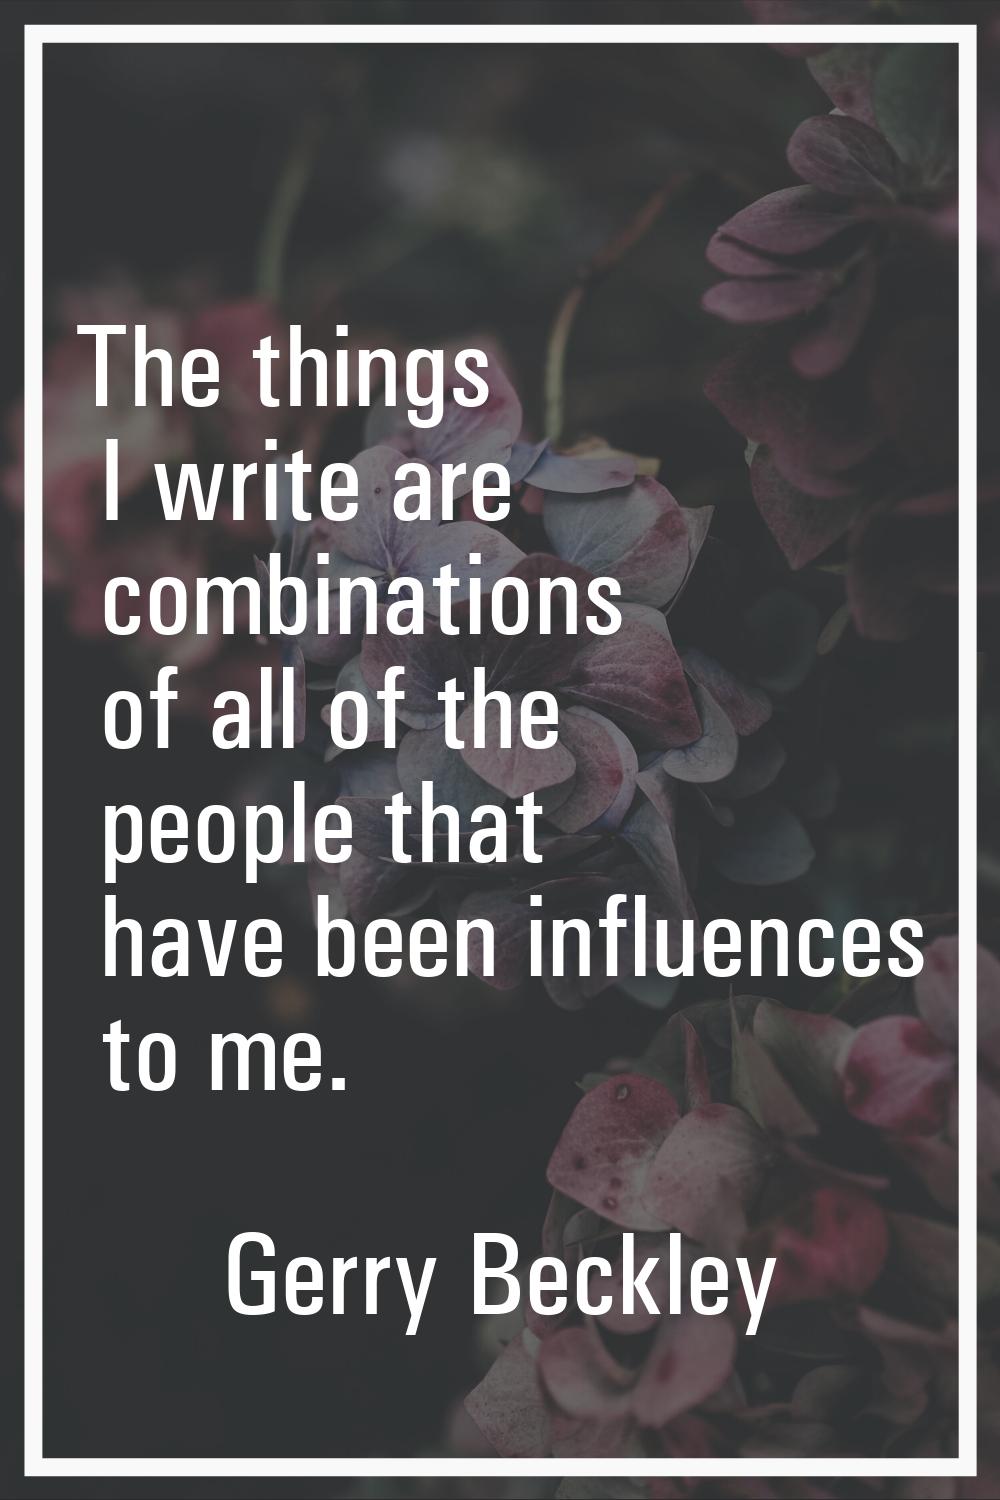 The things I write are combinations of all of the people that have been influences to me.